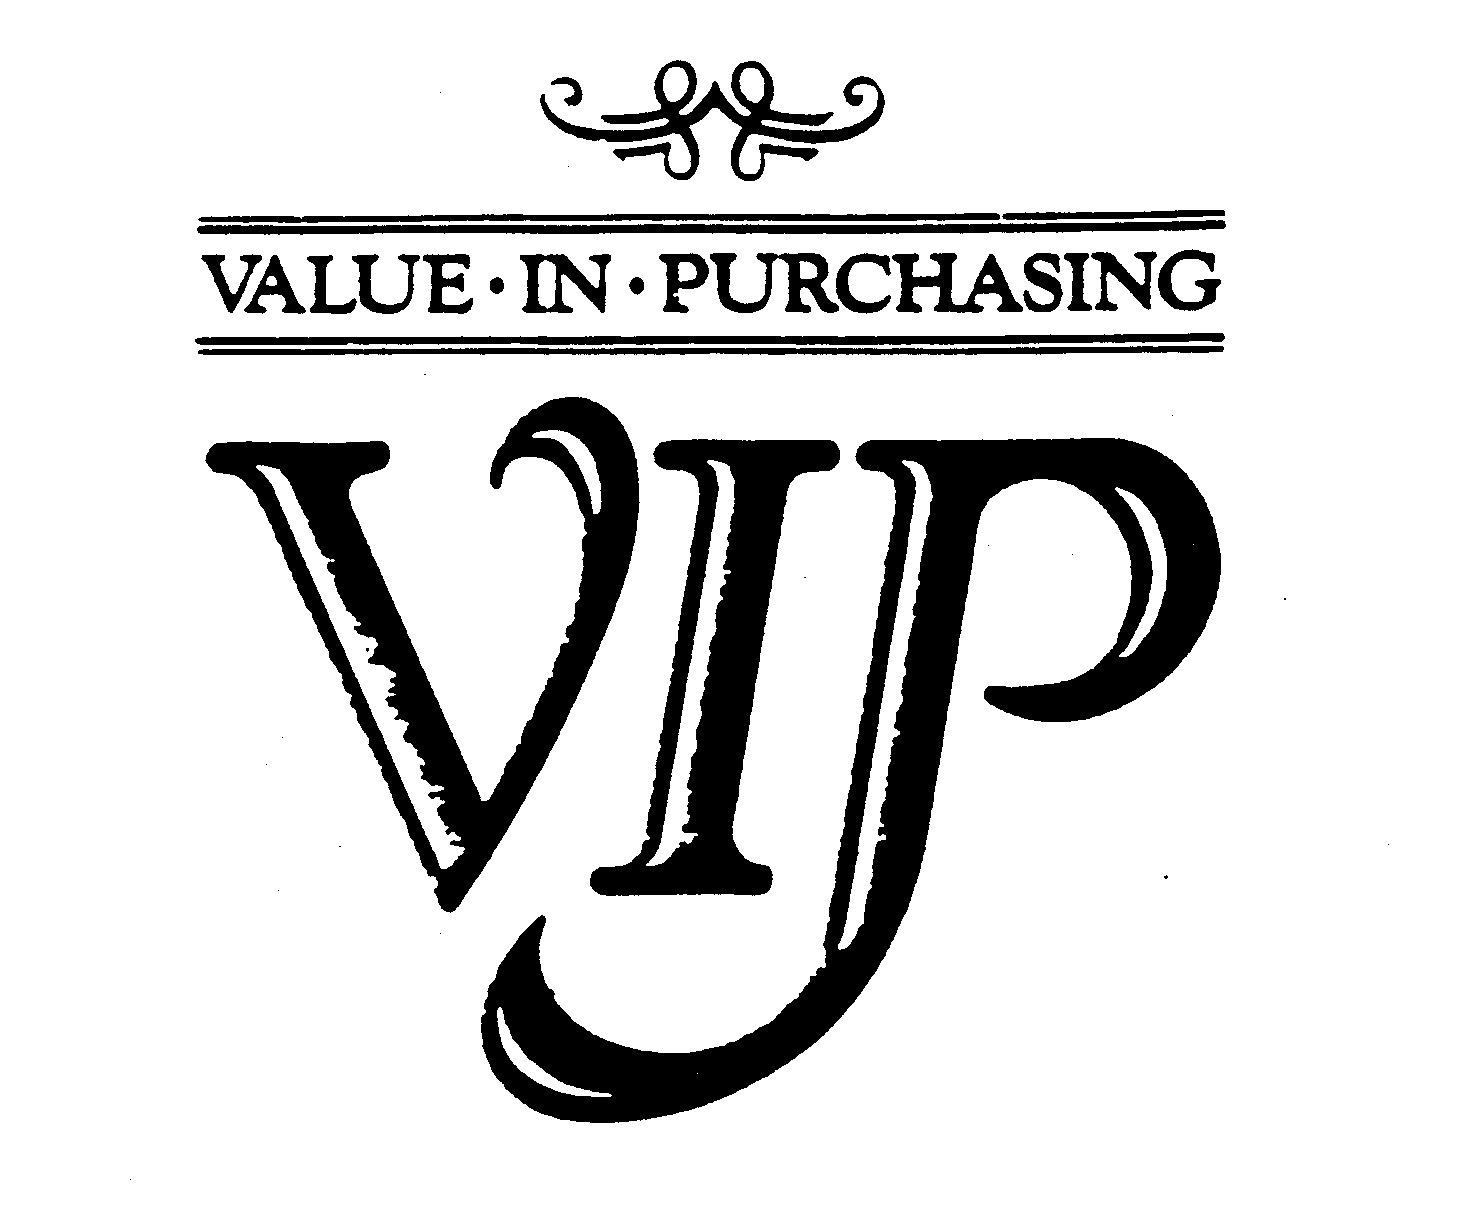  VALUE-IN-PURCHASING VIP